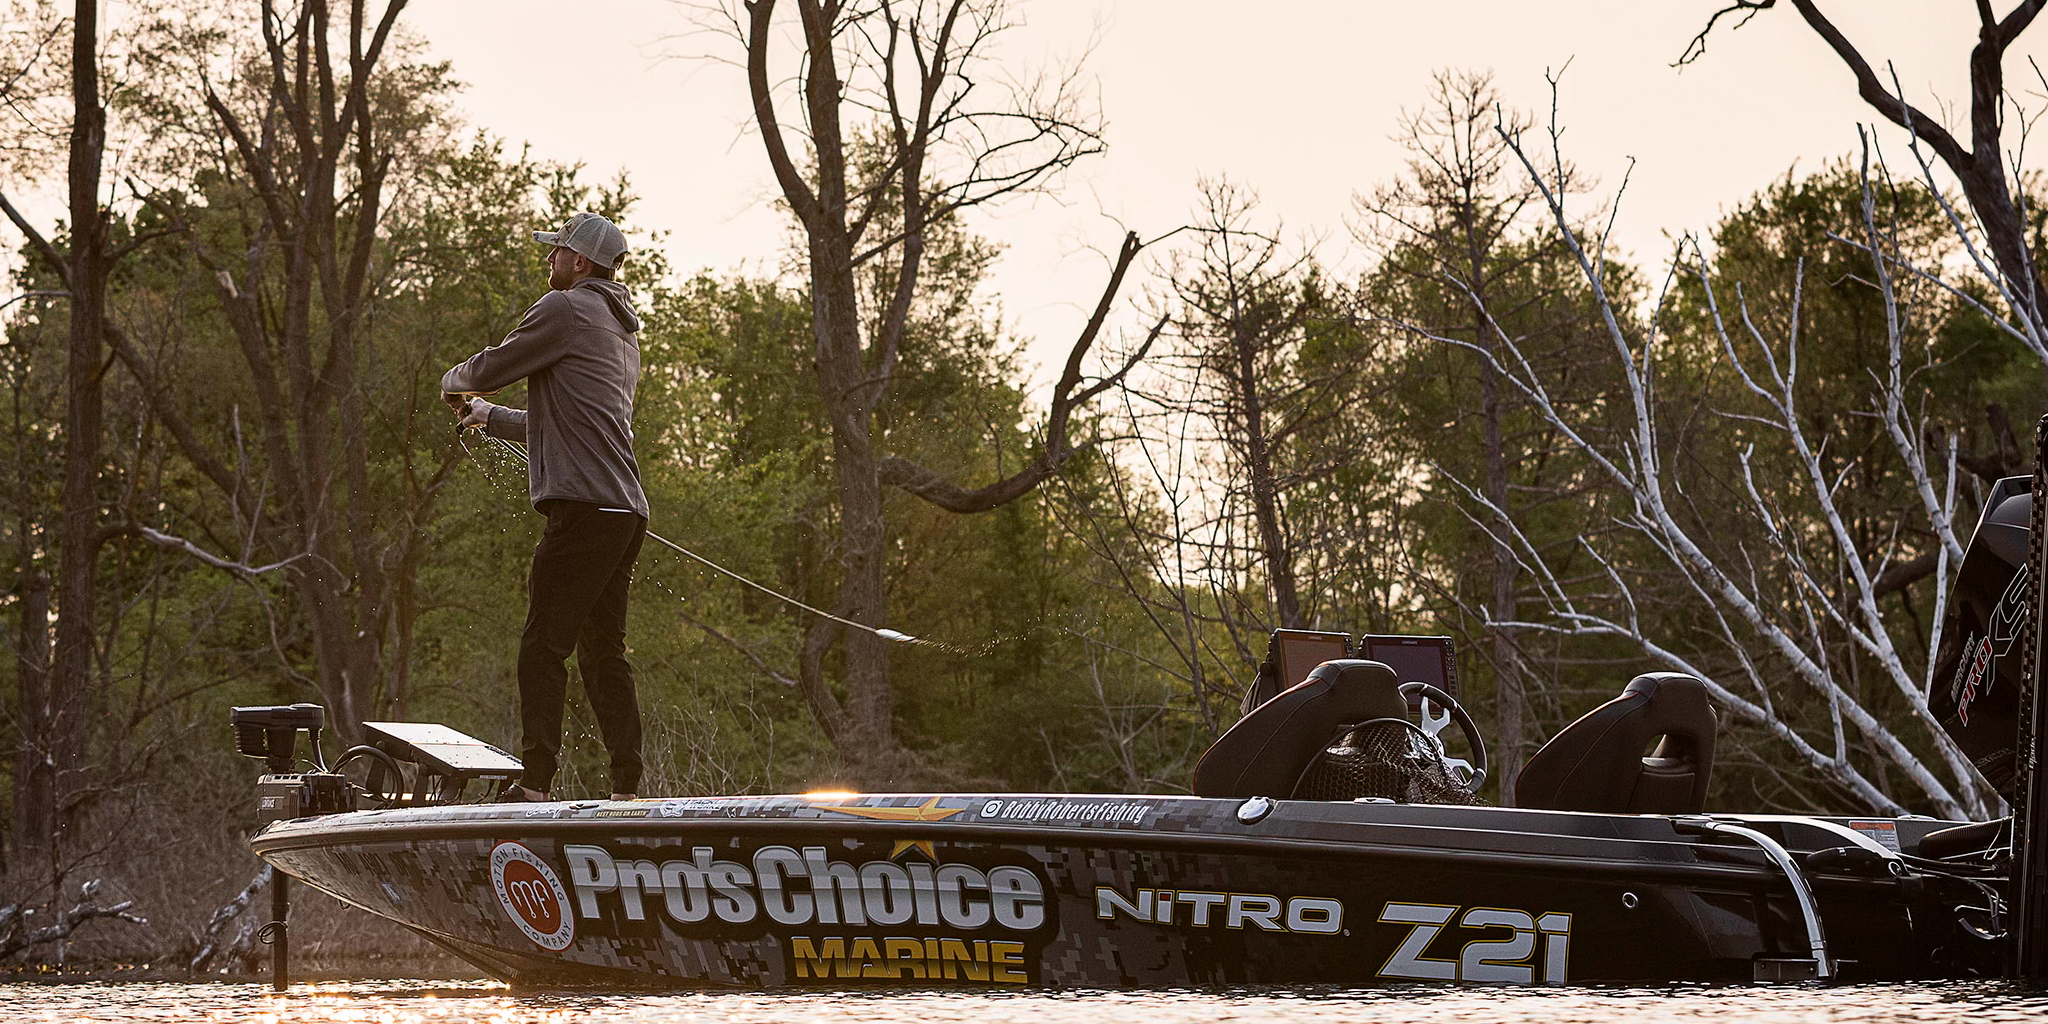 Bobby Roberts Fishing making a cast in a wrapped Nitro Z21 with a Motion fishing and Pros Choice Marine Logo